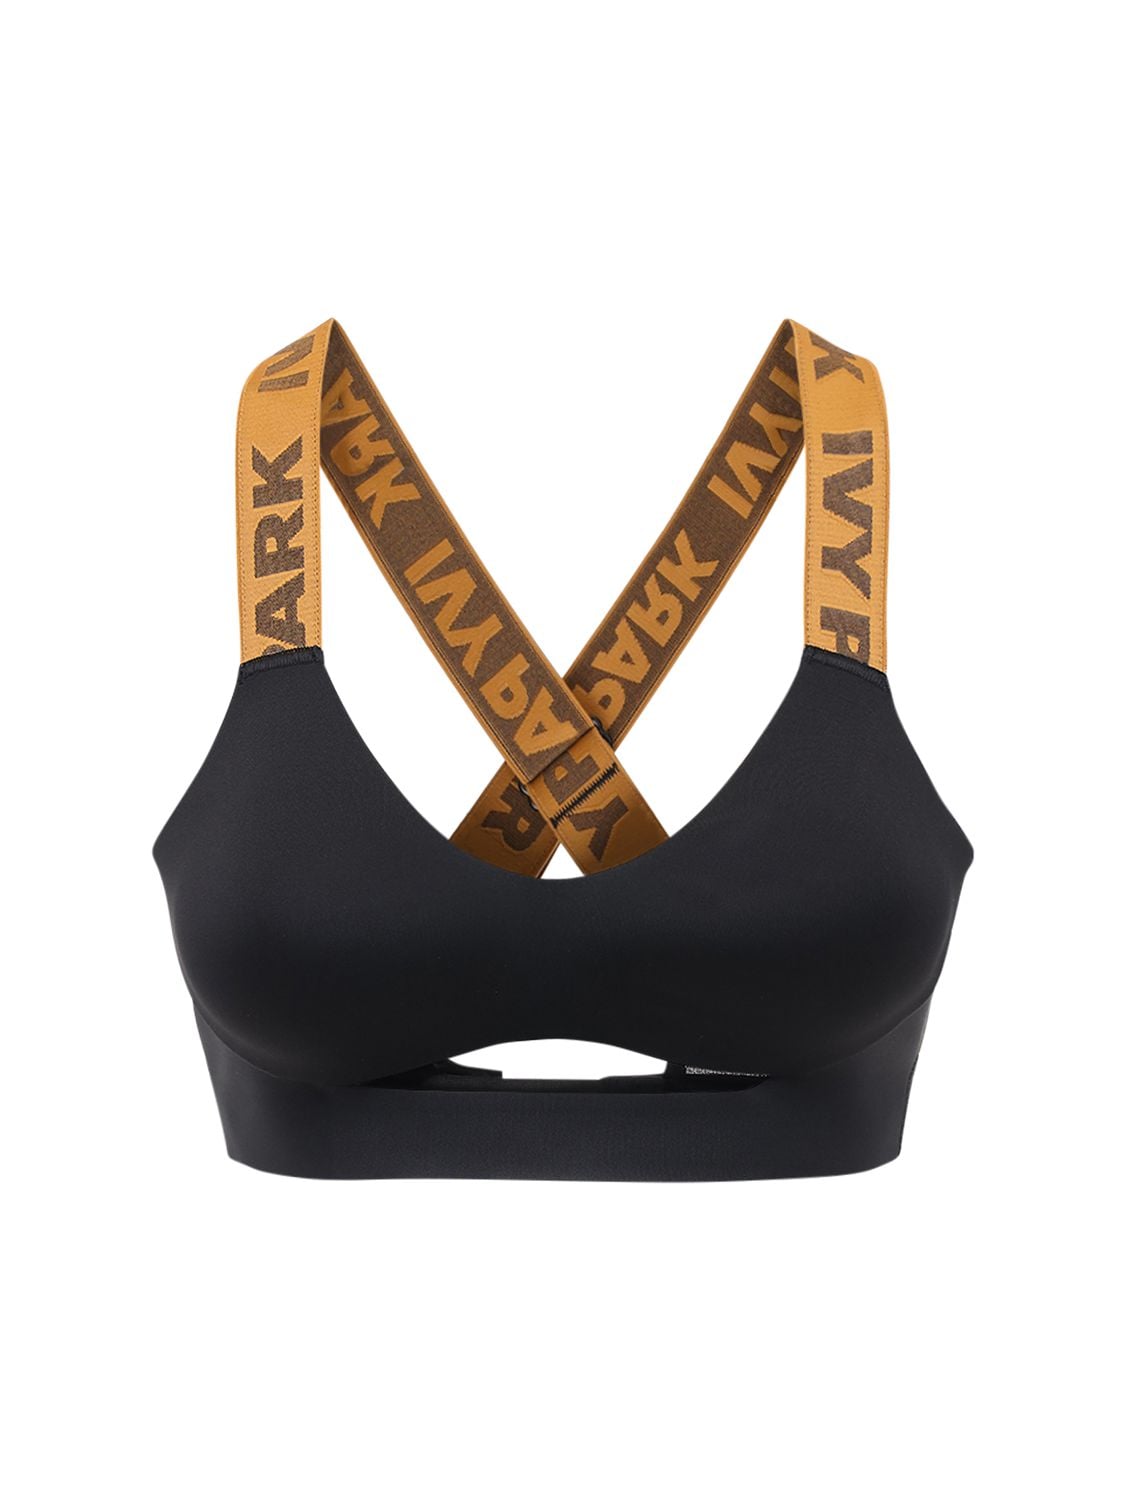 Adidas X Ivy Park Ivy Park Cut Out Bra Top In Black